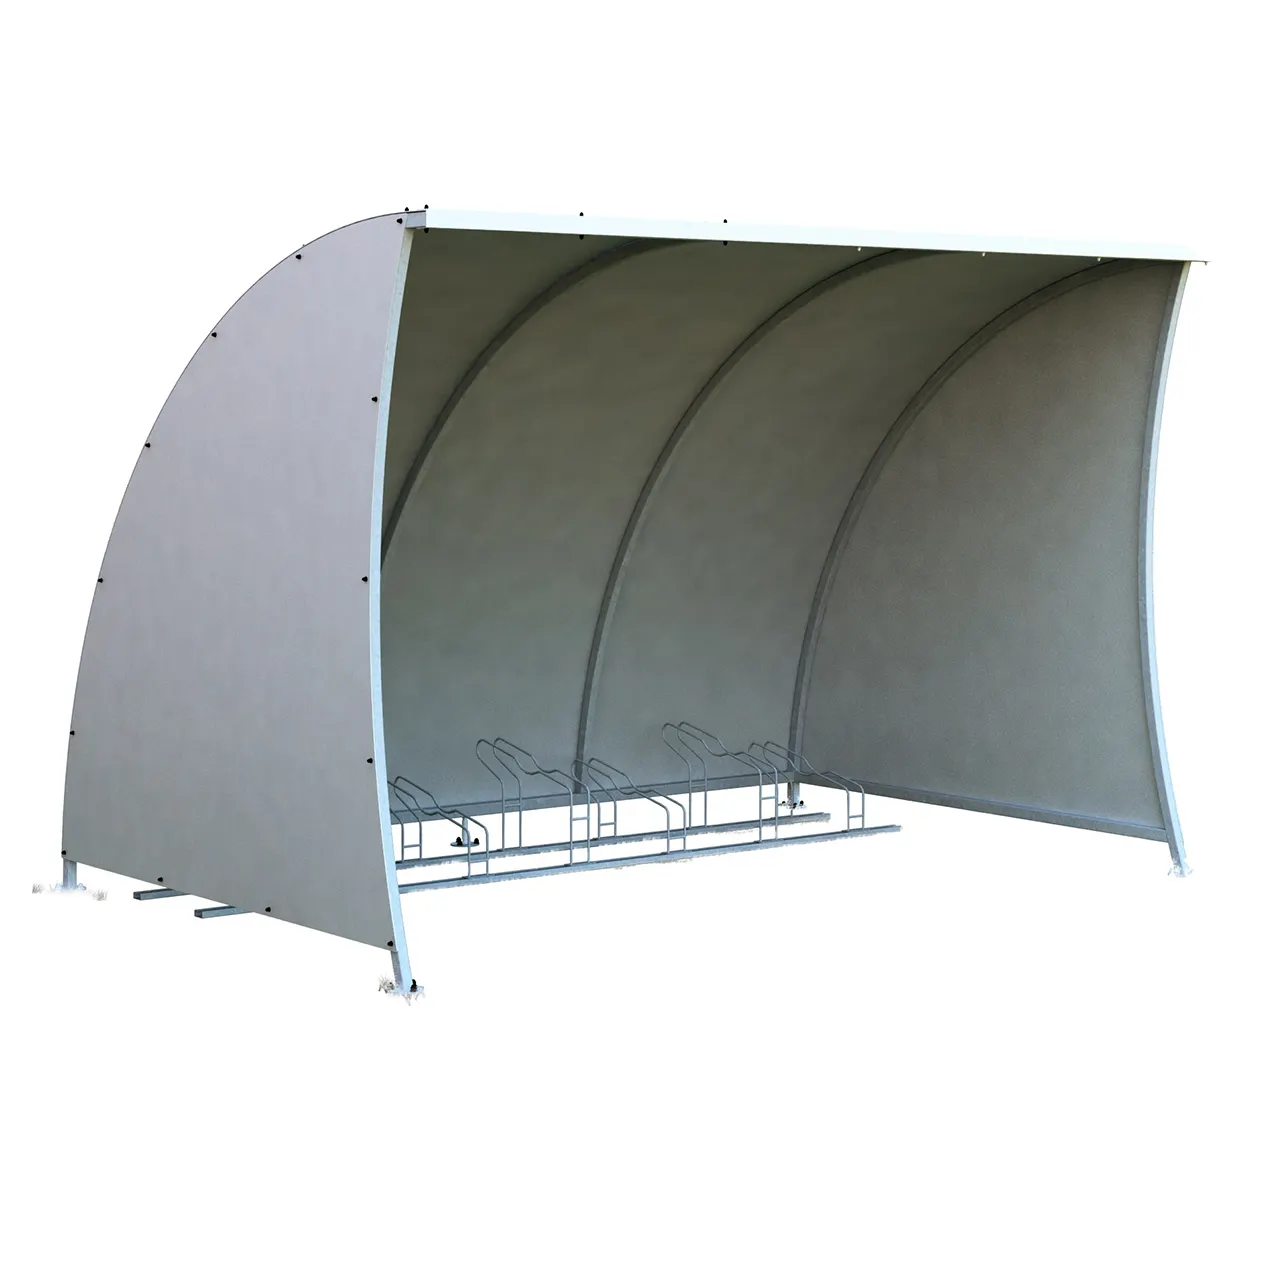 High Quality Patented Made in Italy Canopy Roof Bicycle and Motorcycle Cover Galvanised Iron Structure 200x214x205 cm